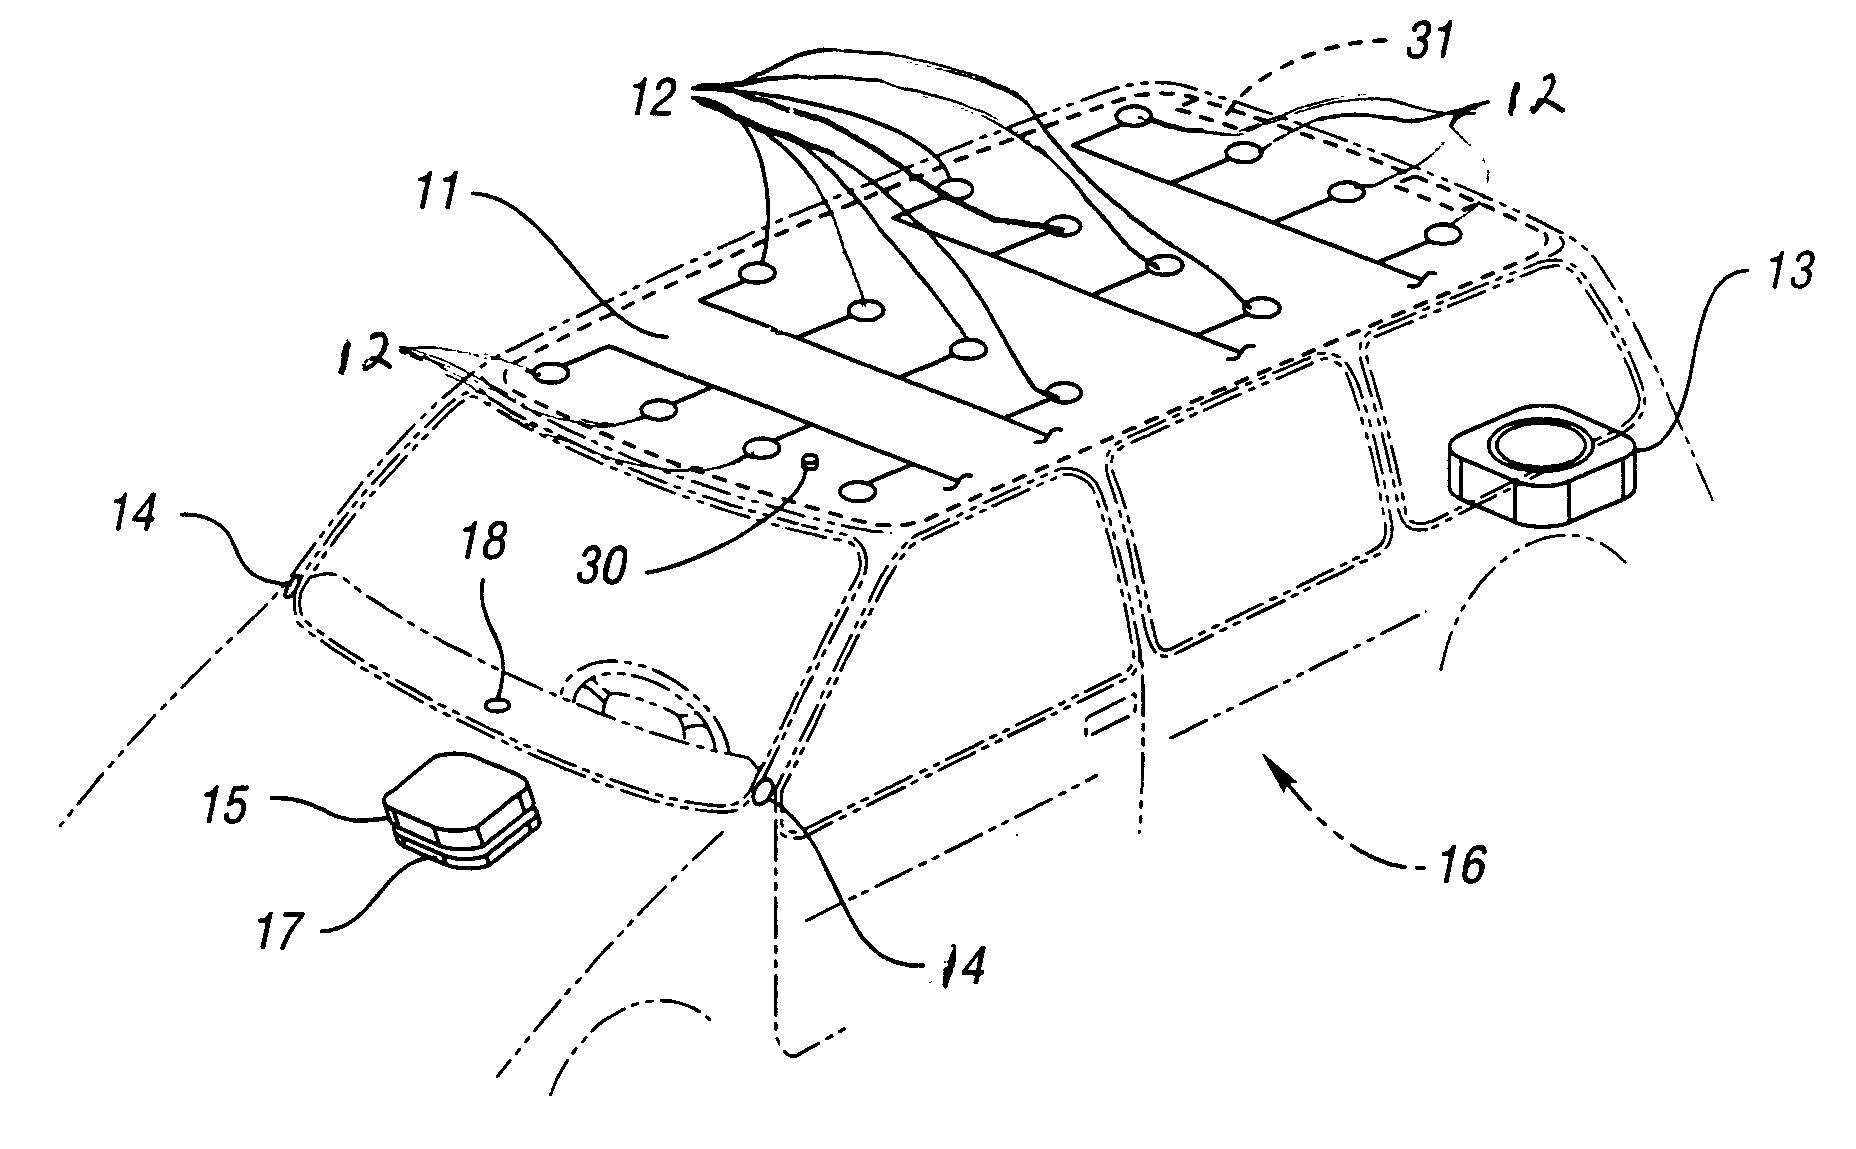 Vehicular audio system and electromagnetic transducer assembly for use therein